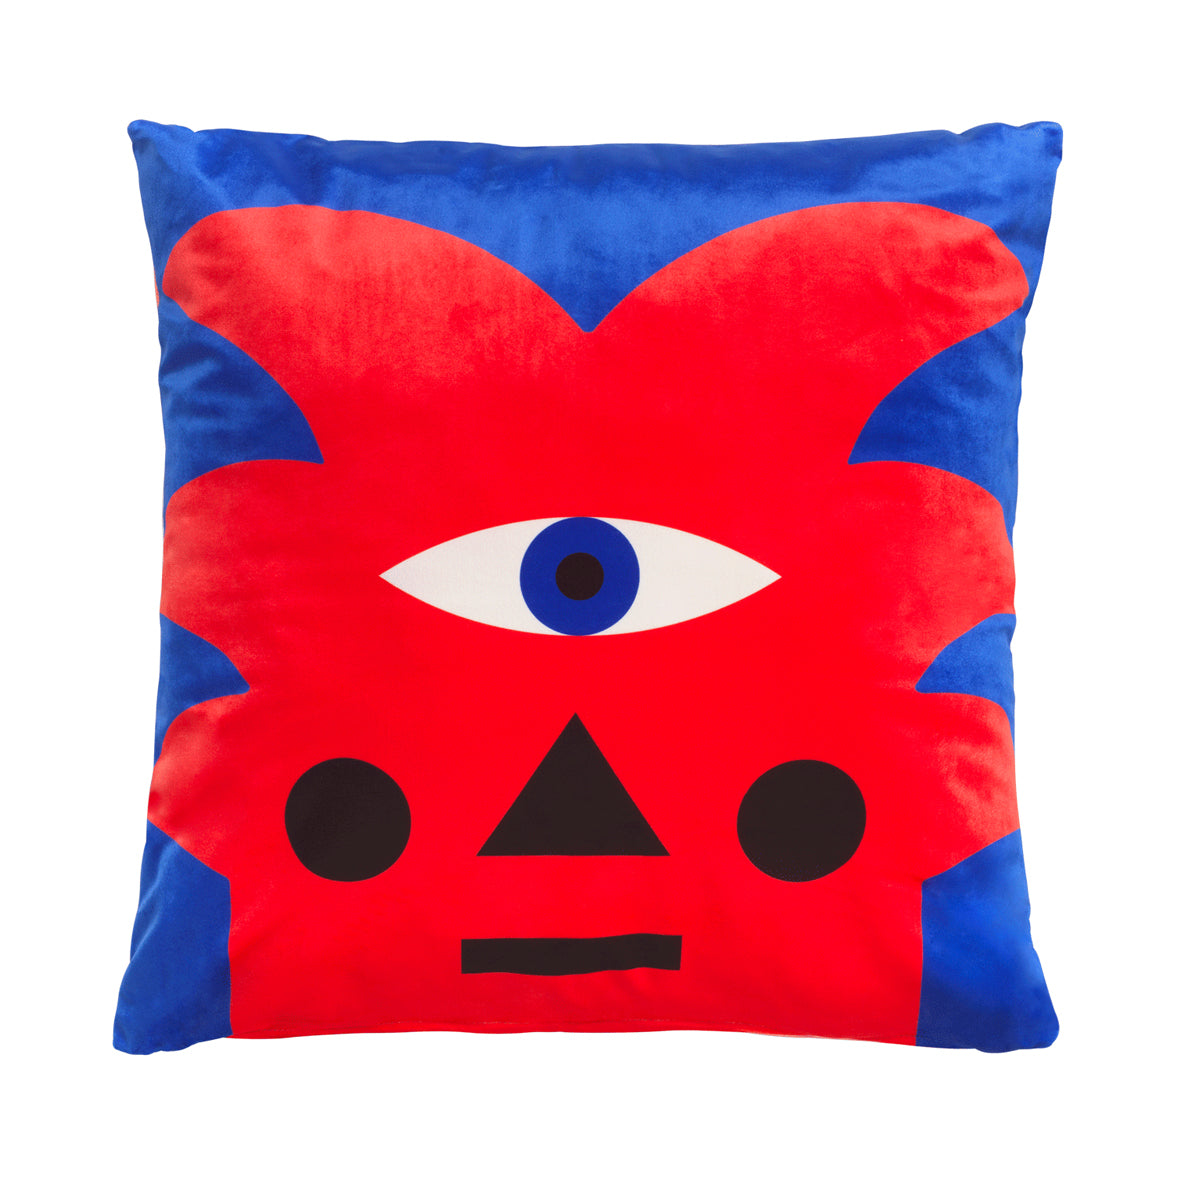 Oggian Red Palm Cushion Cover by Marco Oggian - Qeeboo